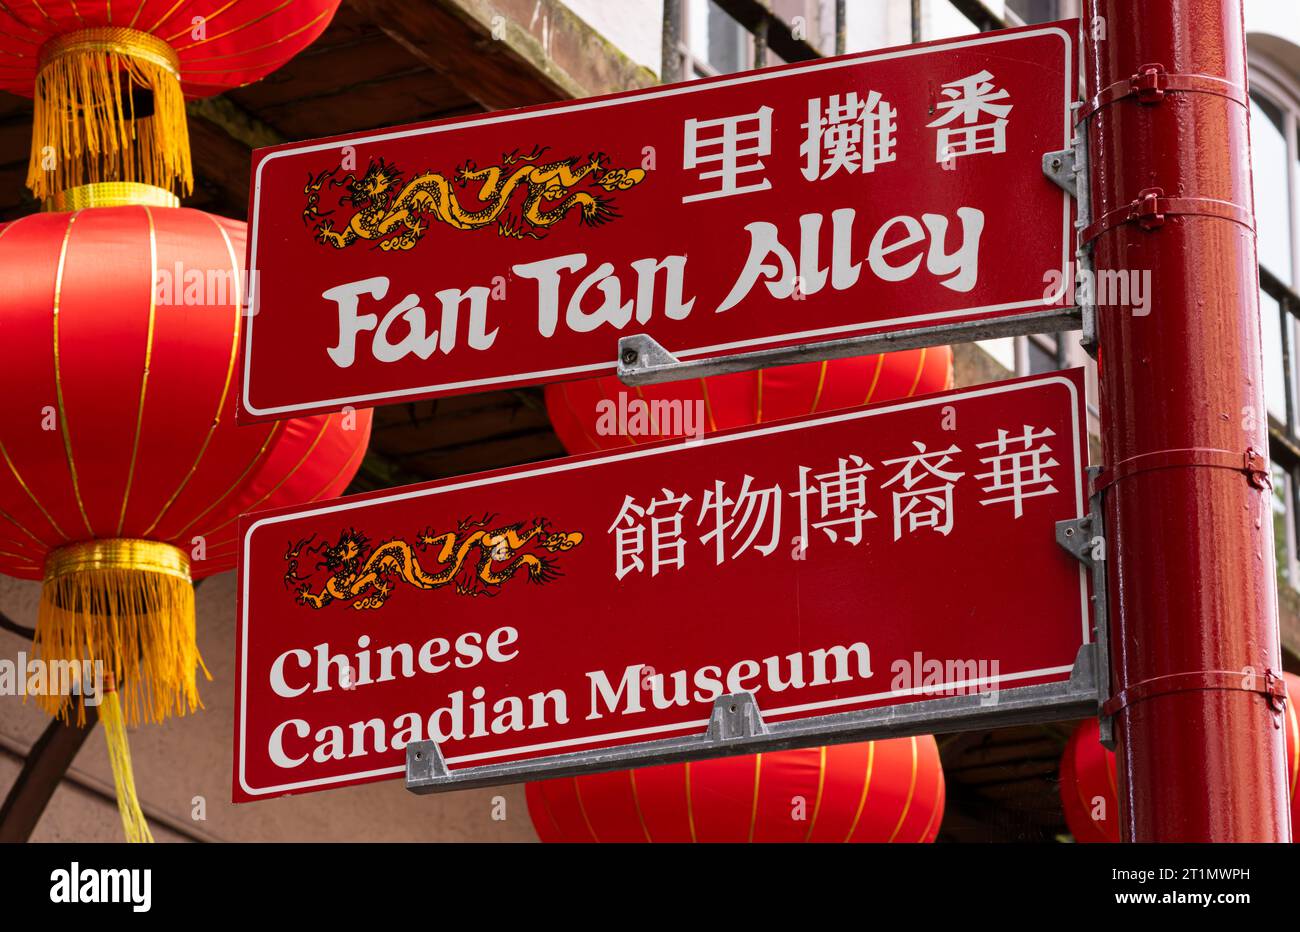 Signs for Fan Tan Alley and the Chinese Canadian Museum in Chinatown, Victoria, British Columbia, Canada. Stock Photo